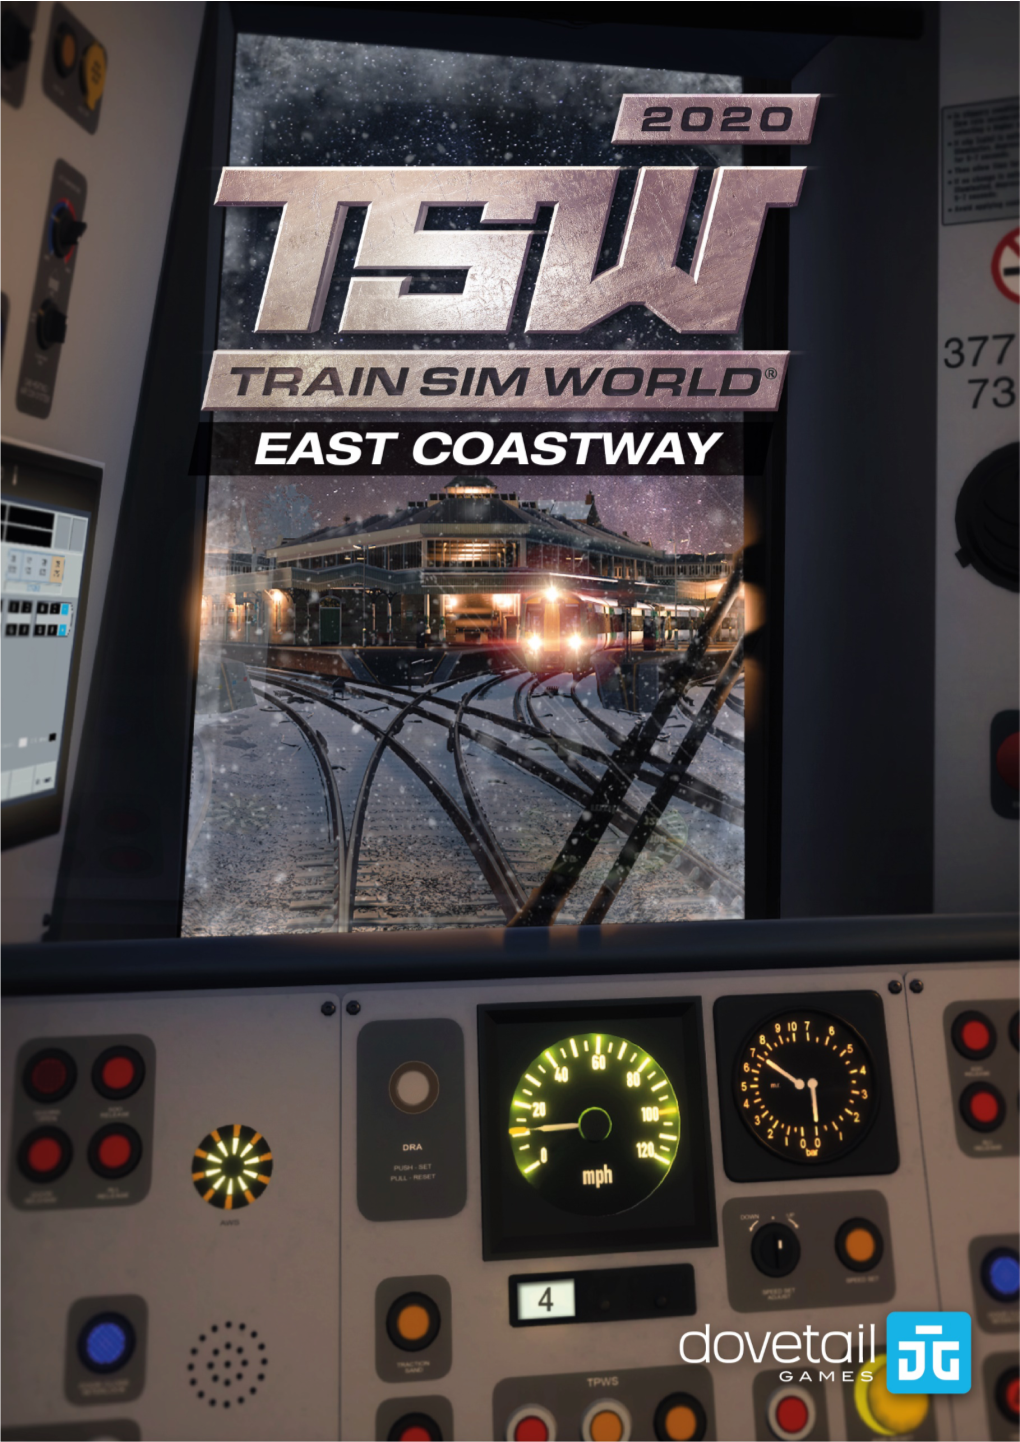 An Introduction to East Coastway